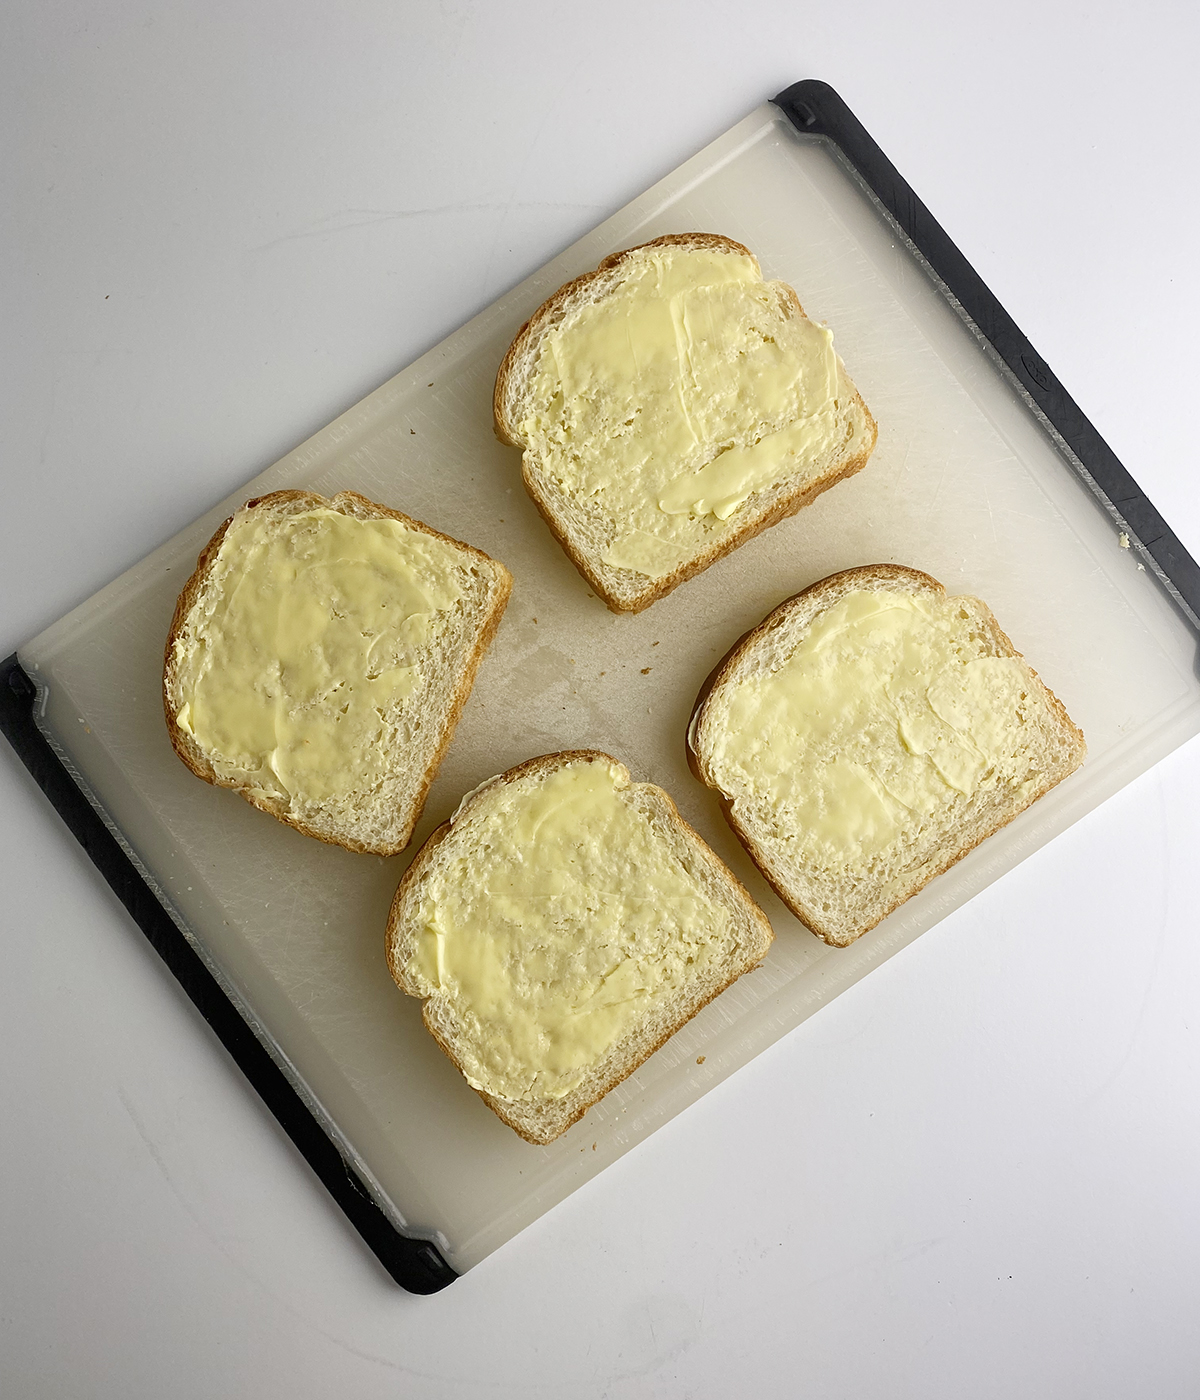 Four slices of buttered bread on a cutting board.